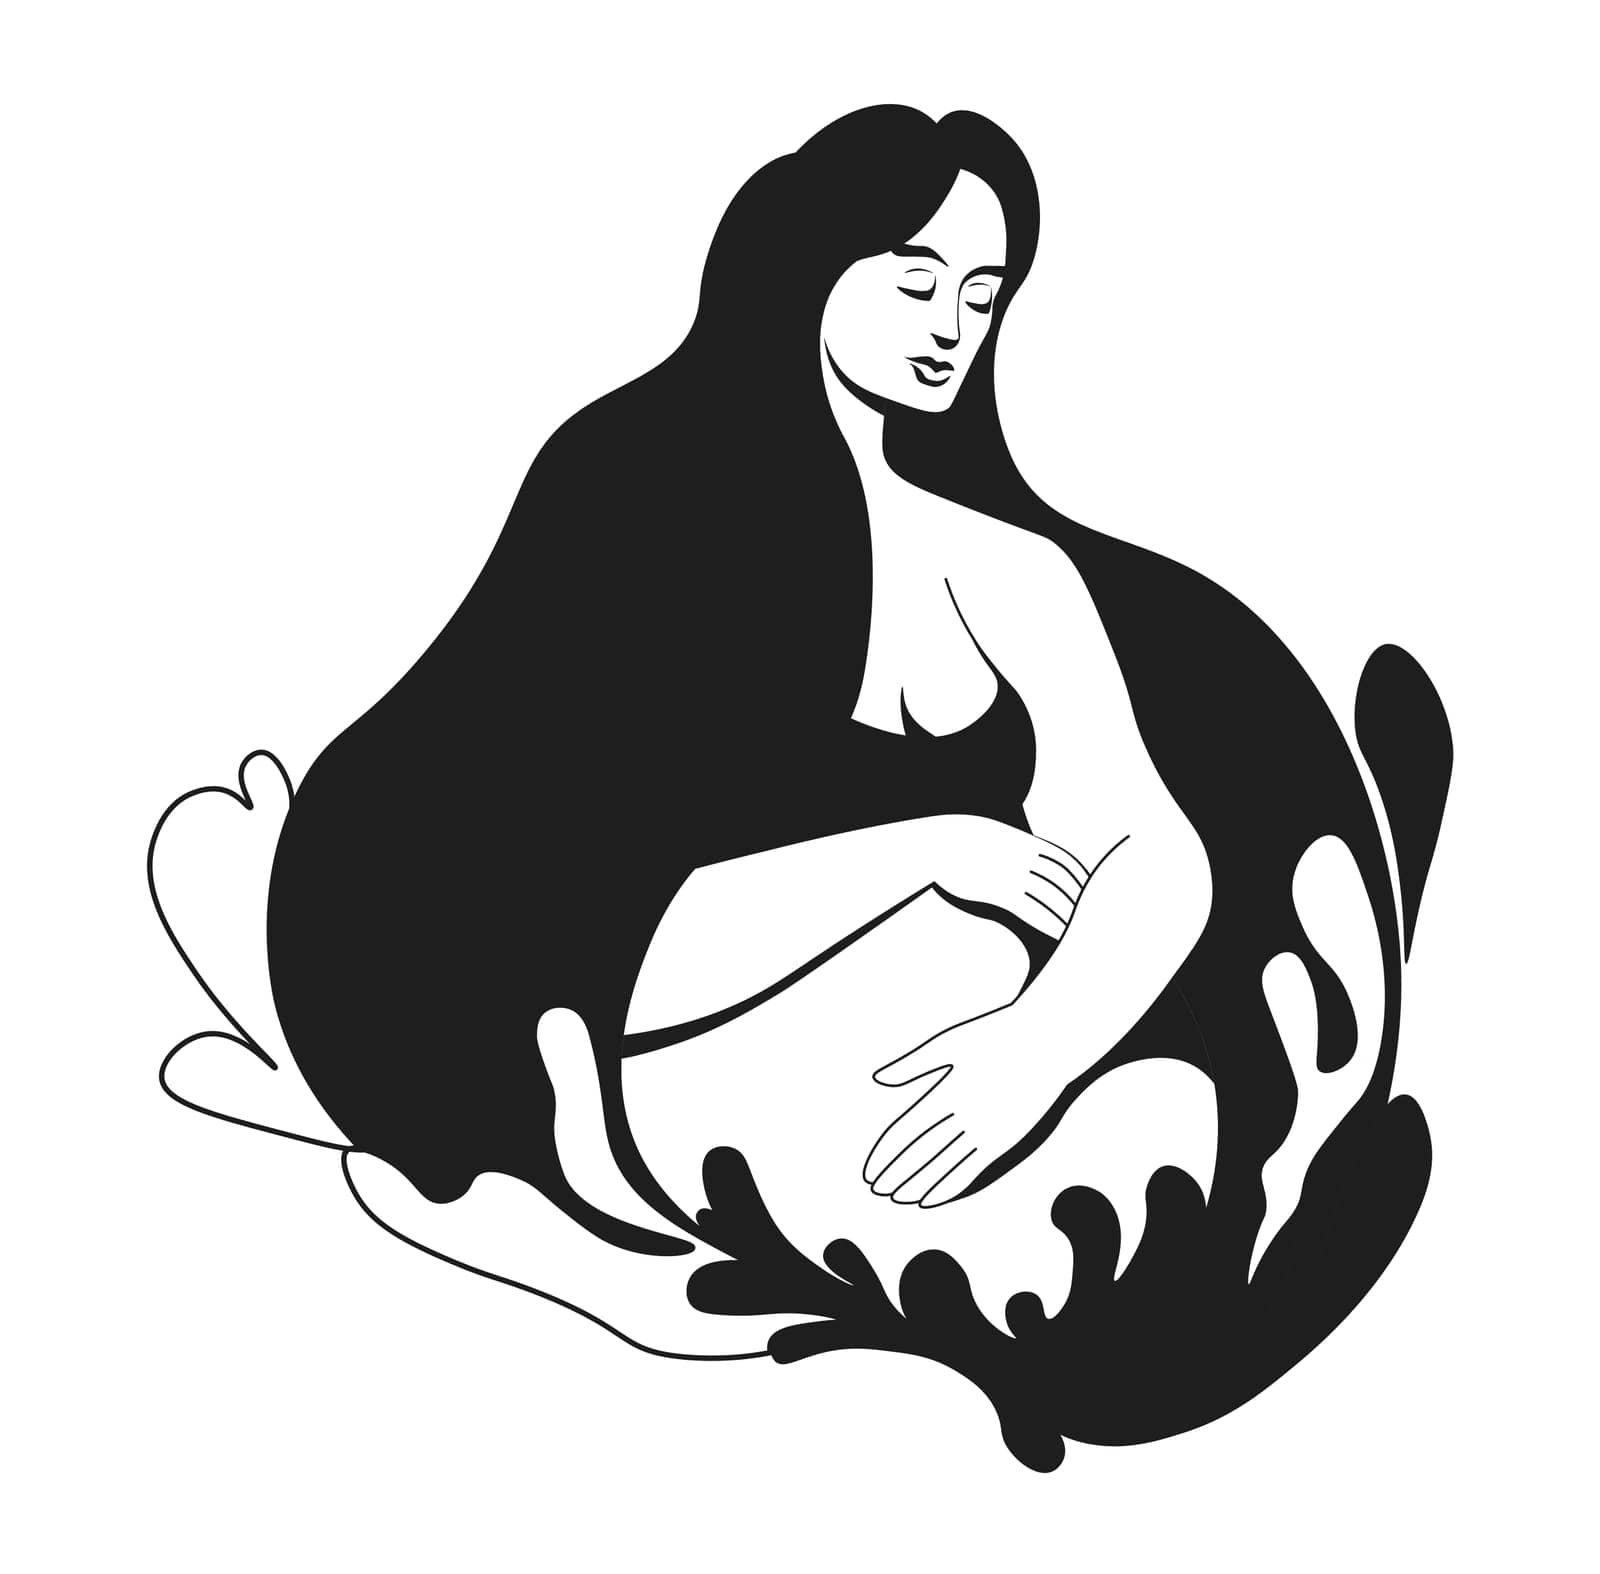 Motherhood and maternity, pregnant woman vector by Sonulkaster